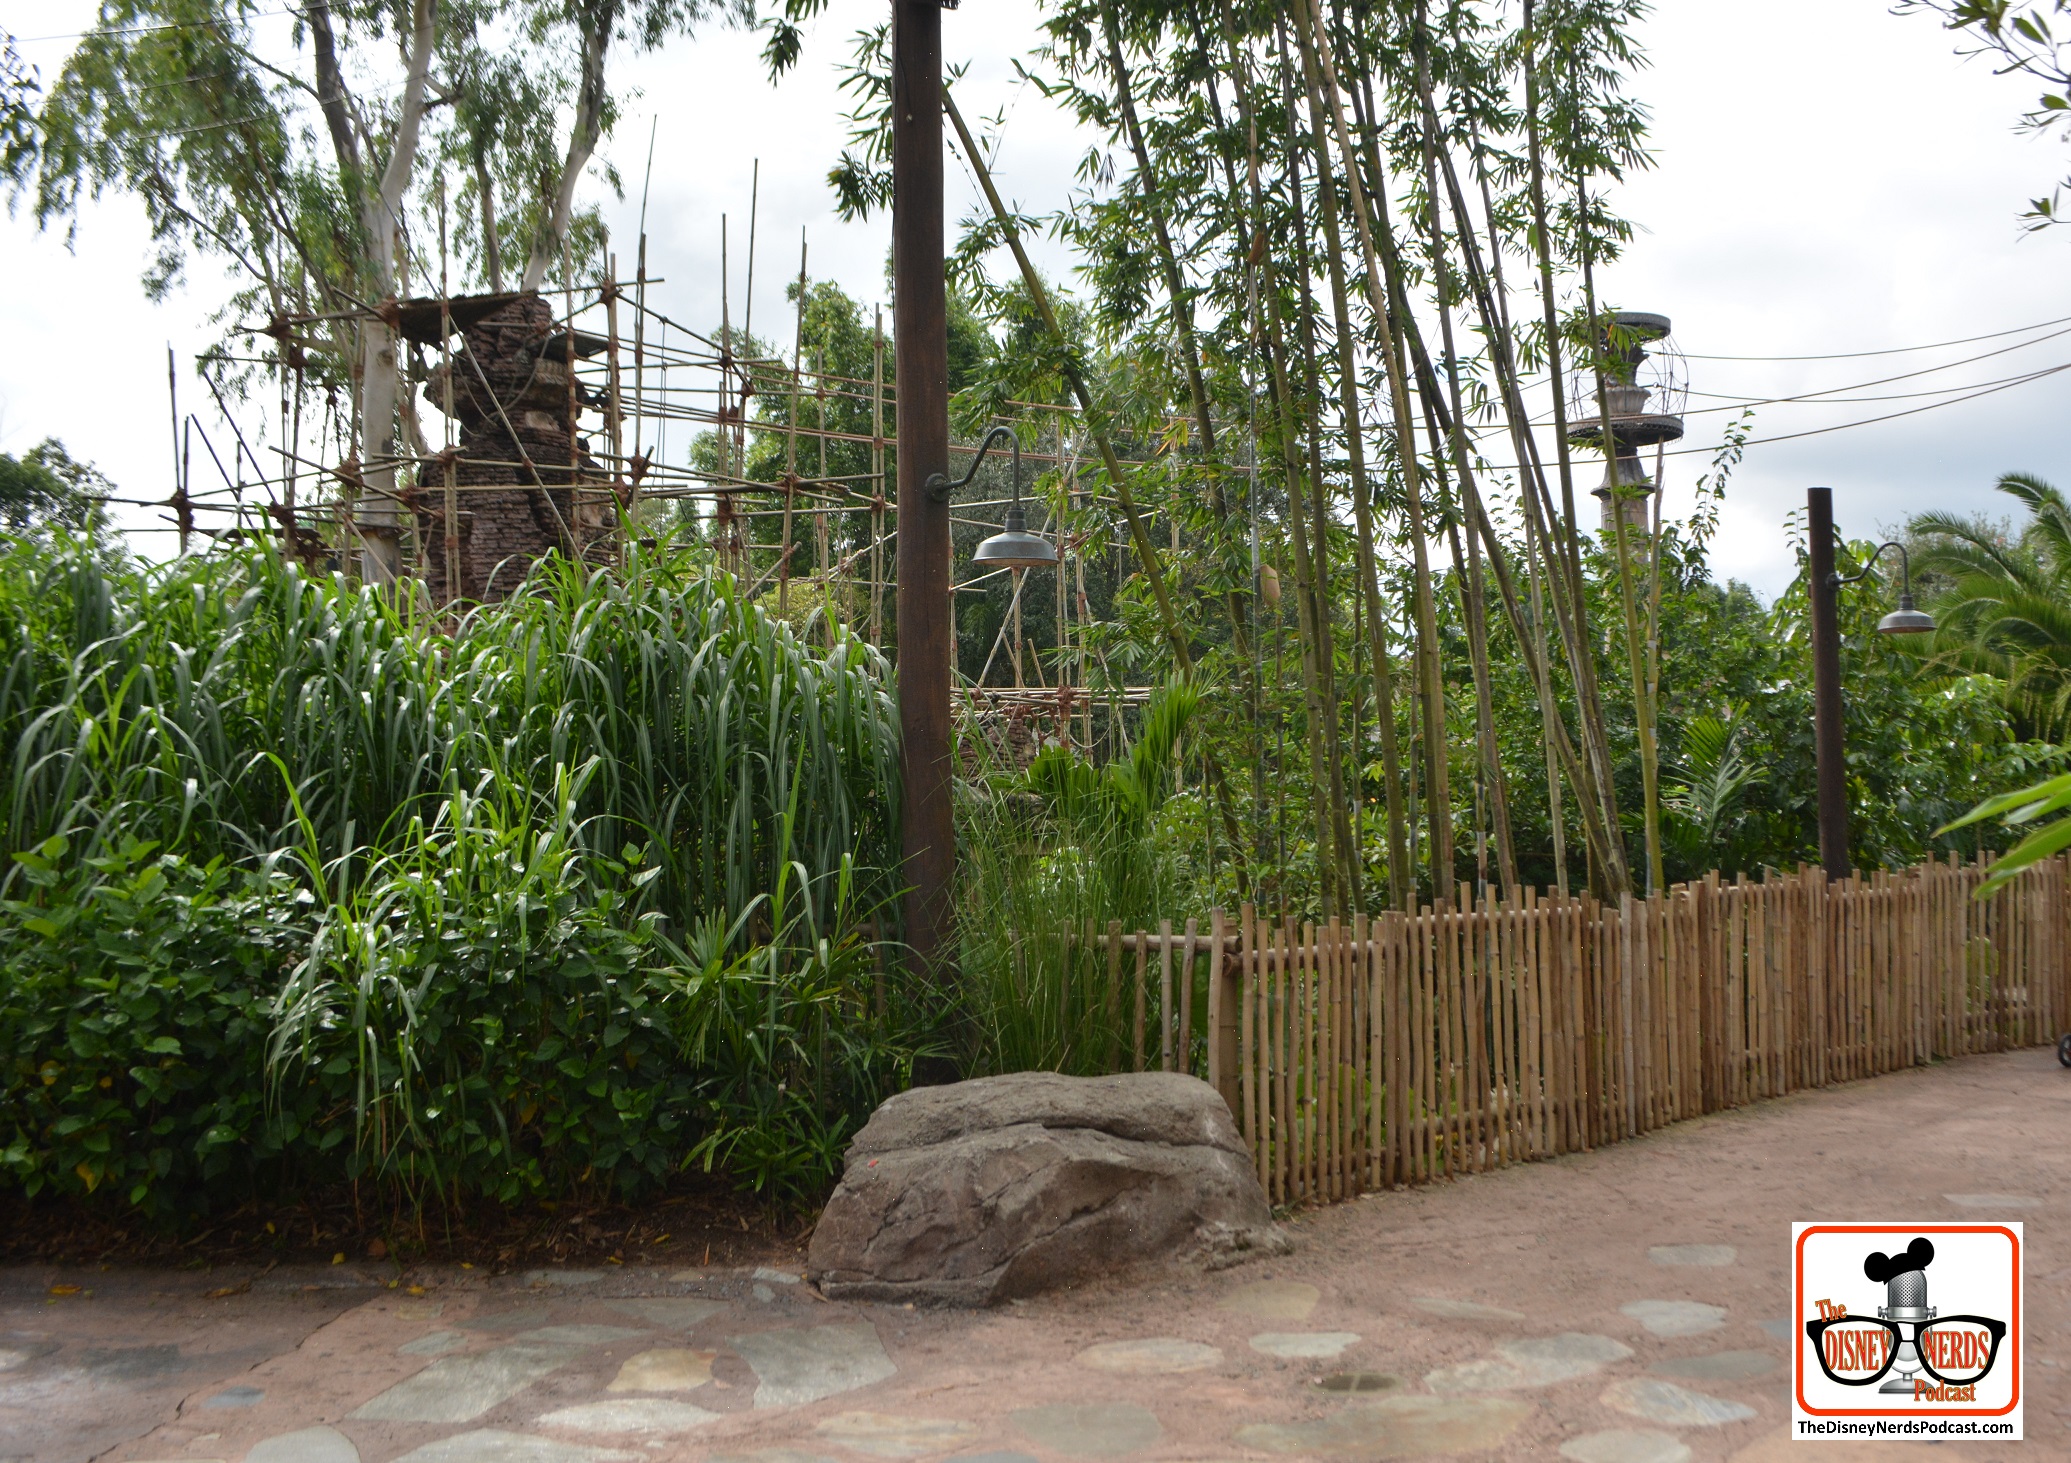 A new pathway recently opened at Disney Animal Kingdom - The Monkey's are to the left, the path leads behind the monkeys to Kali River Rapids - it also provides additional viewing locations for the Monkeys